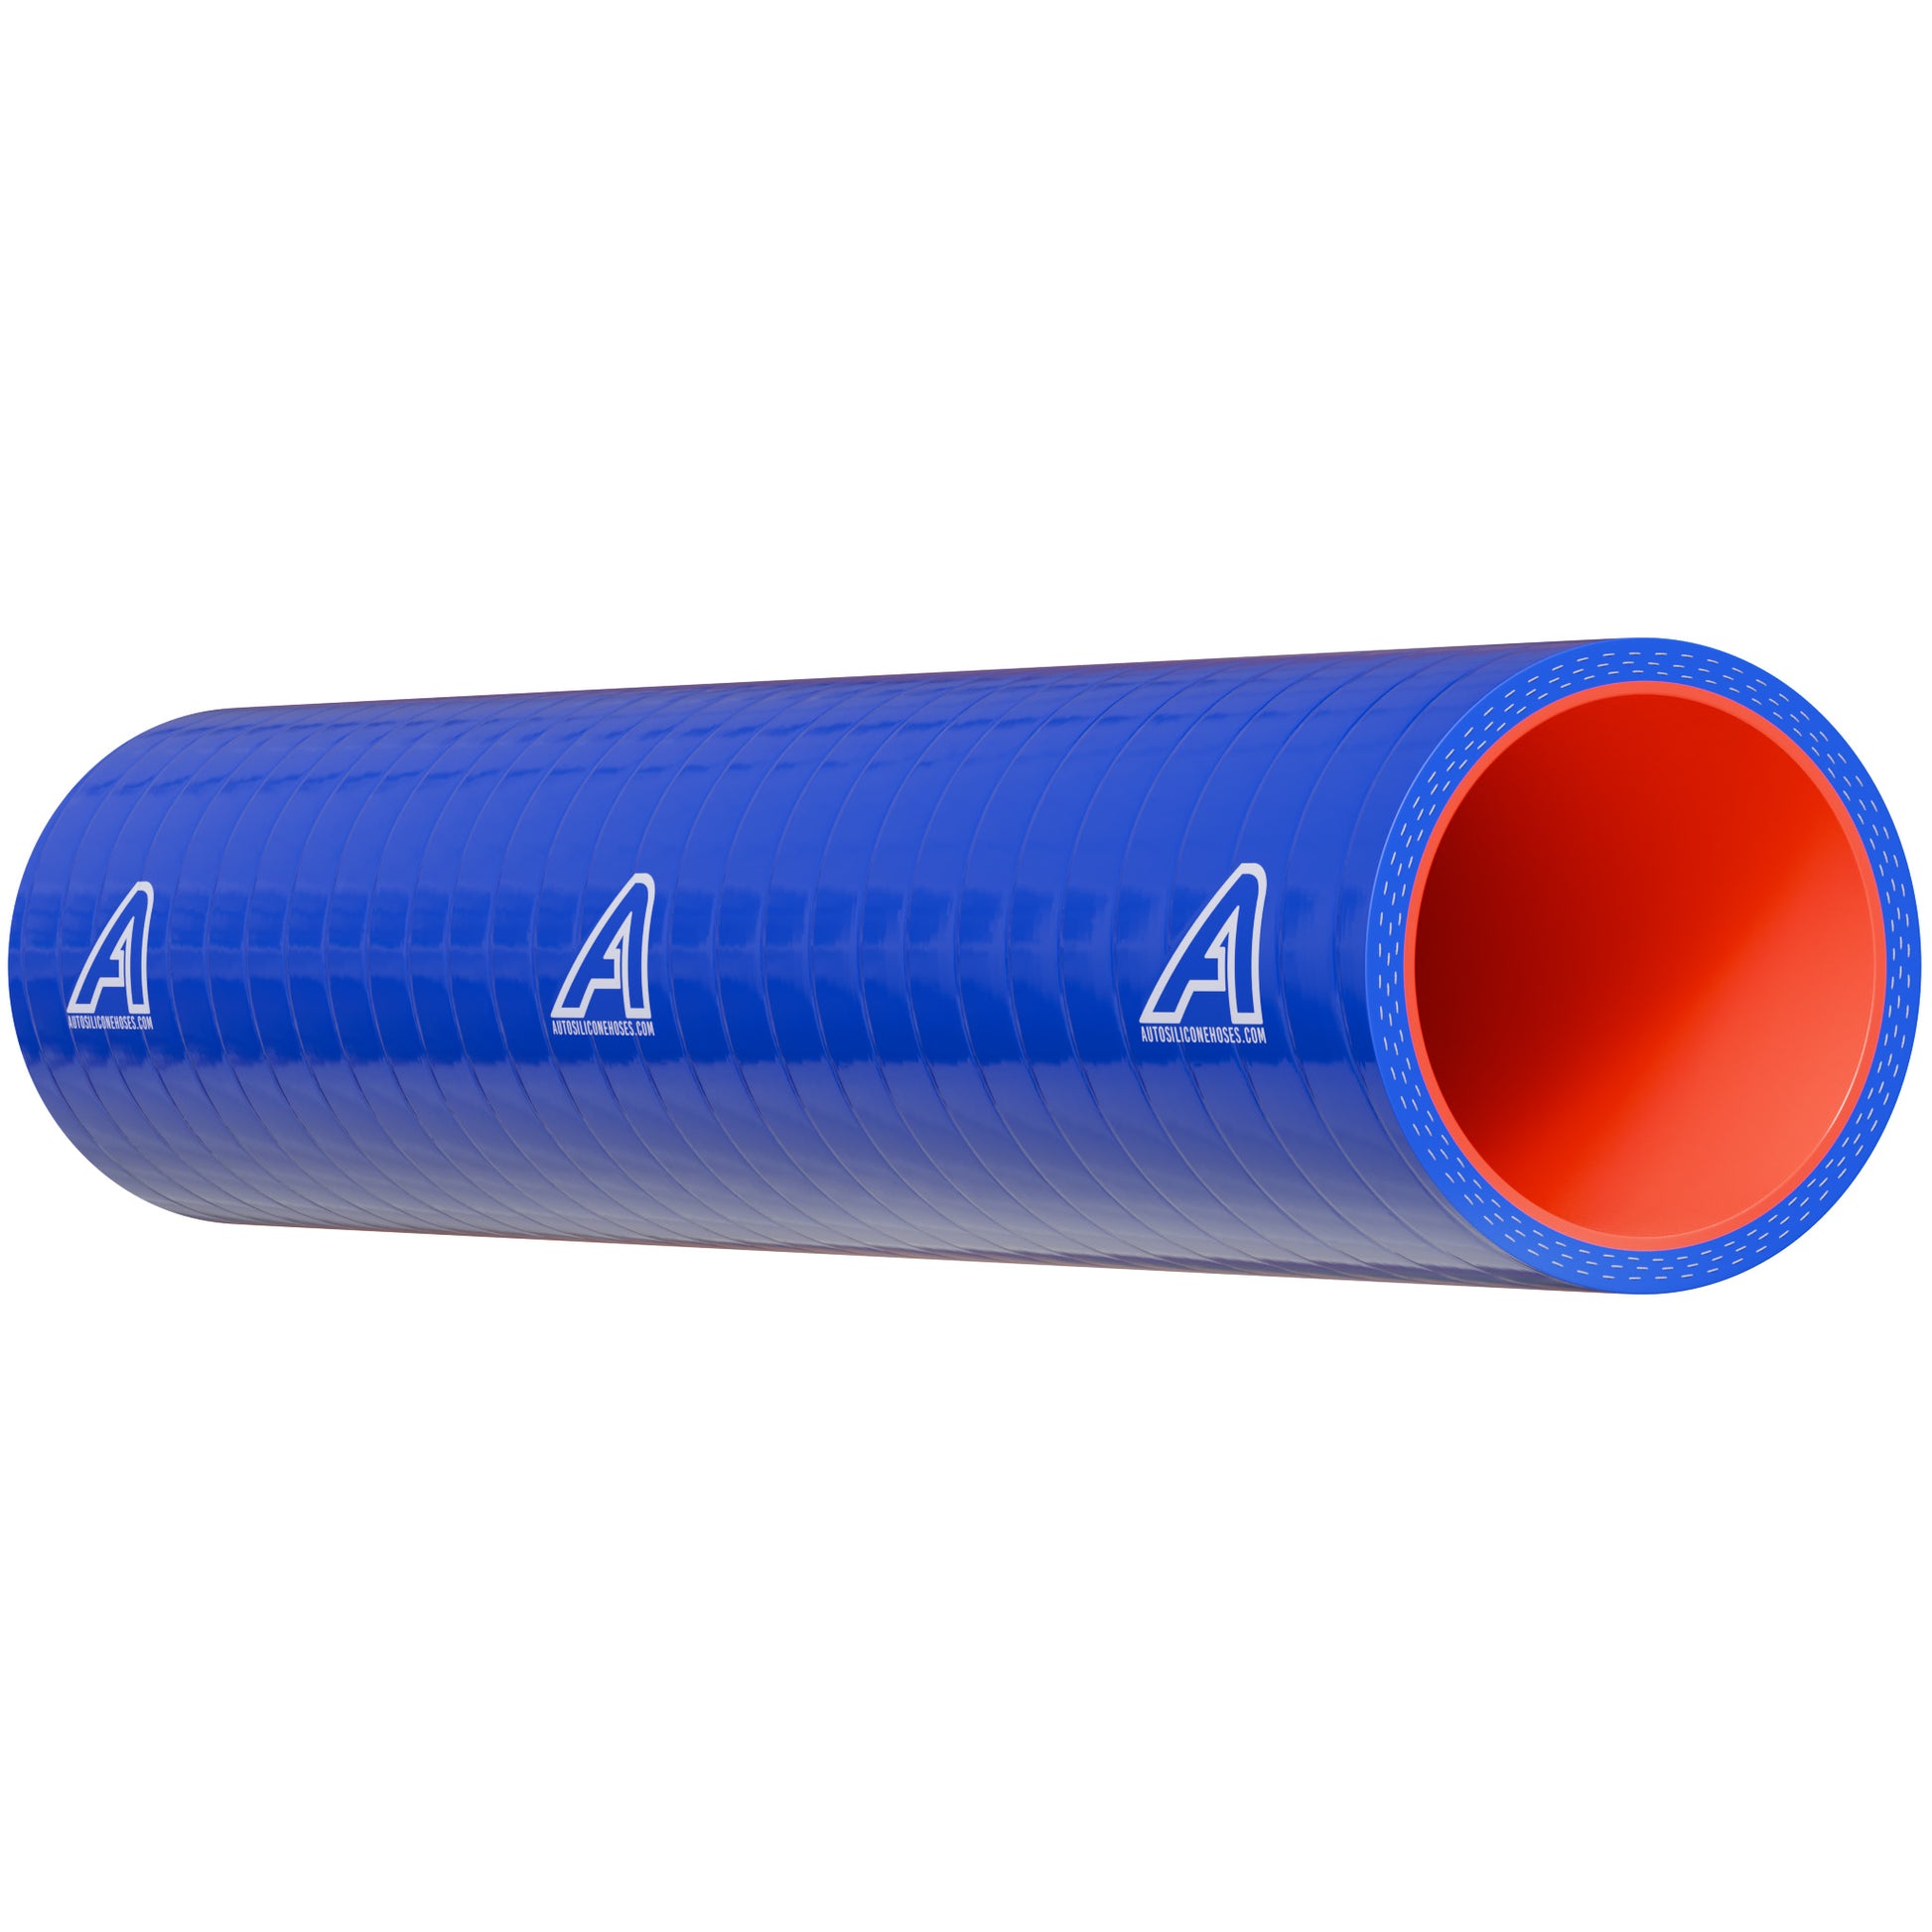 48mm ID Silicone Flouro Fuel & Oil Hose Joiner Motor Vehicle Engine Parts Auto Silicone Hoses   